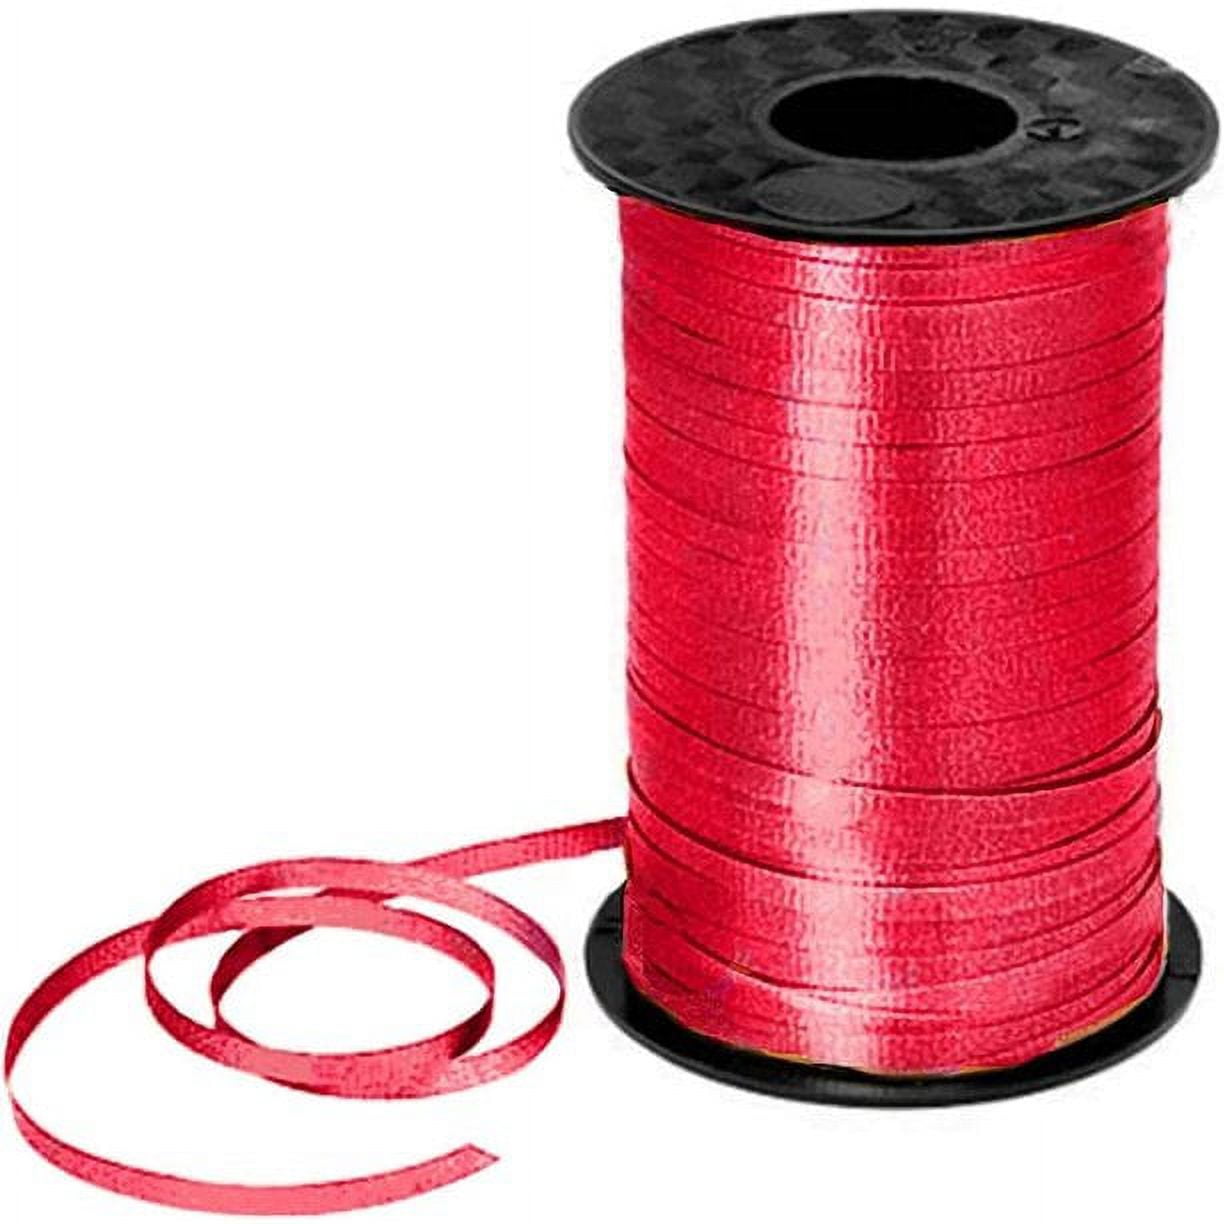 Red Curling Ribbon, 1/5 Wide x 500 Yards Christmas Curling Ribbons for Gift Wrapping, Party Decoration, Balloon String, Hair, Ribbons for Florist